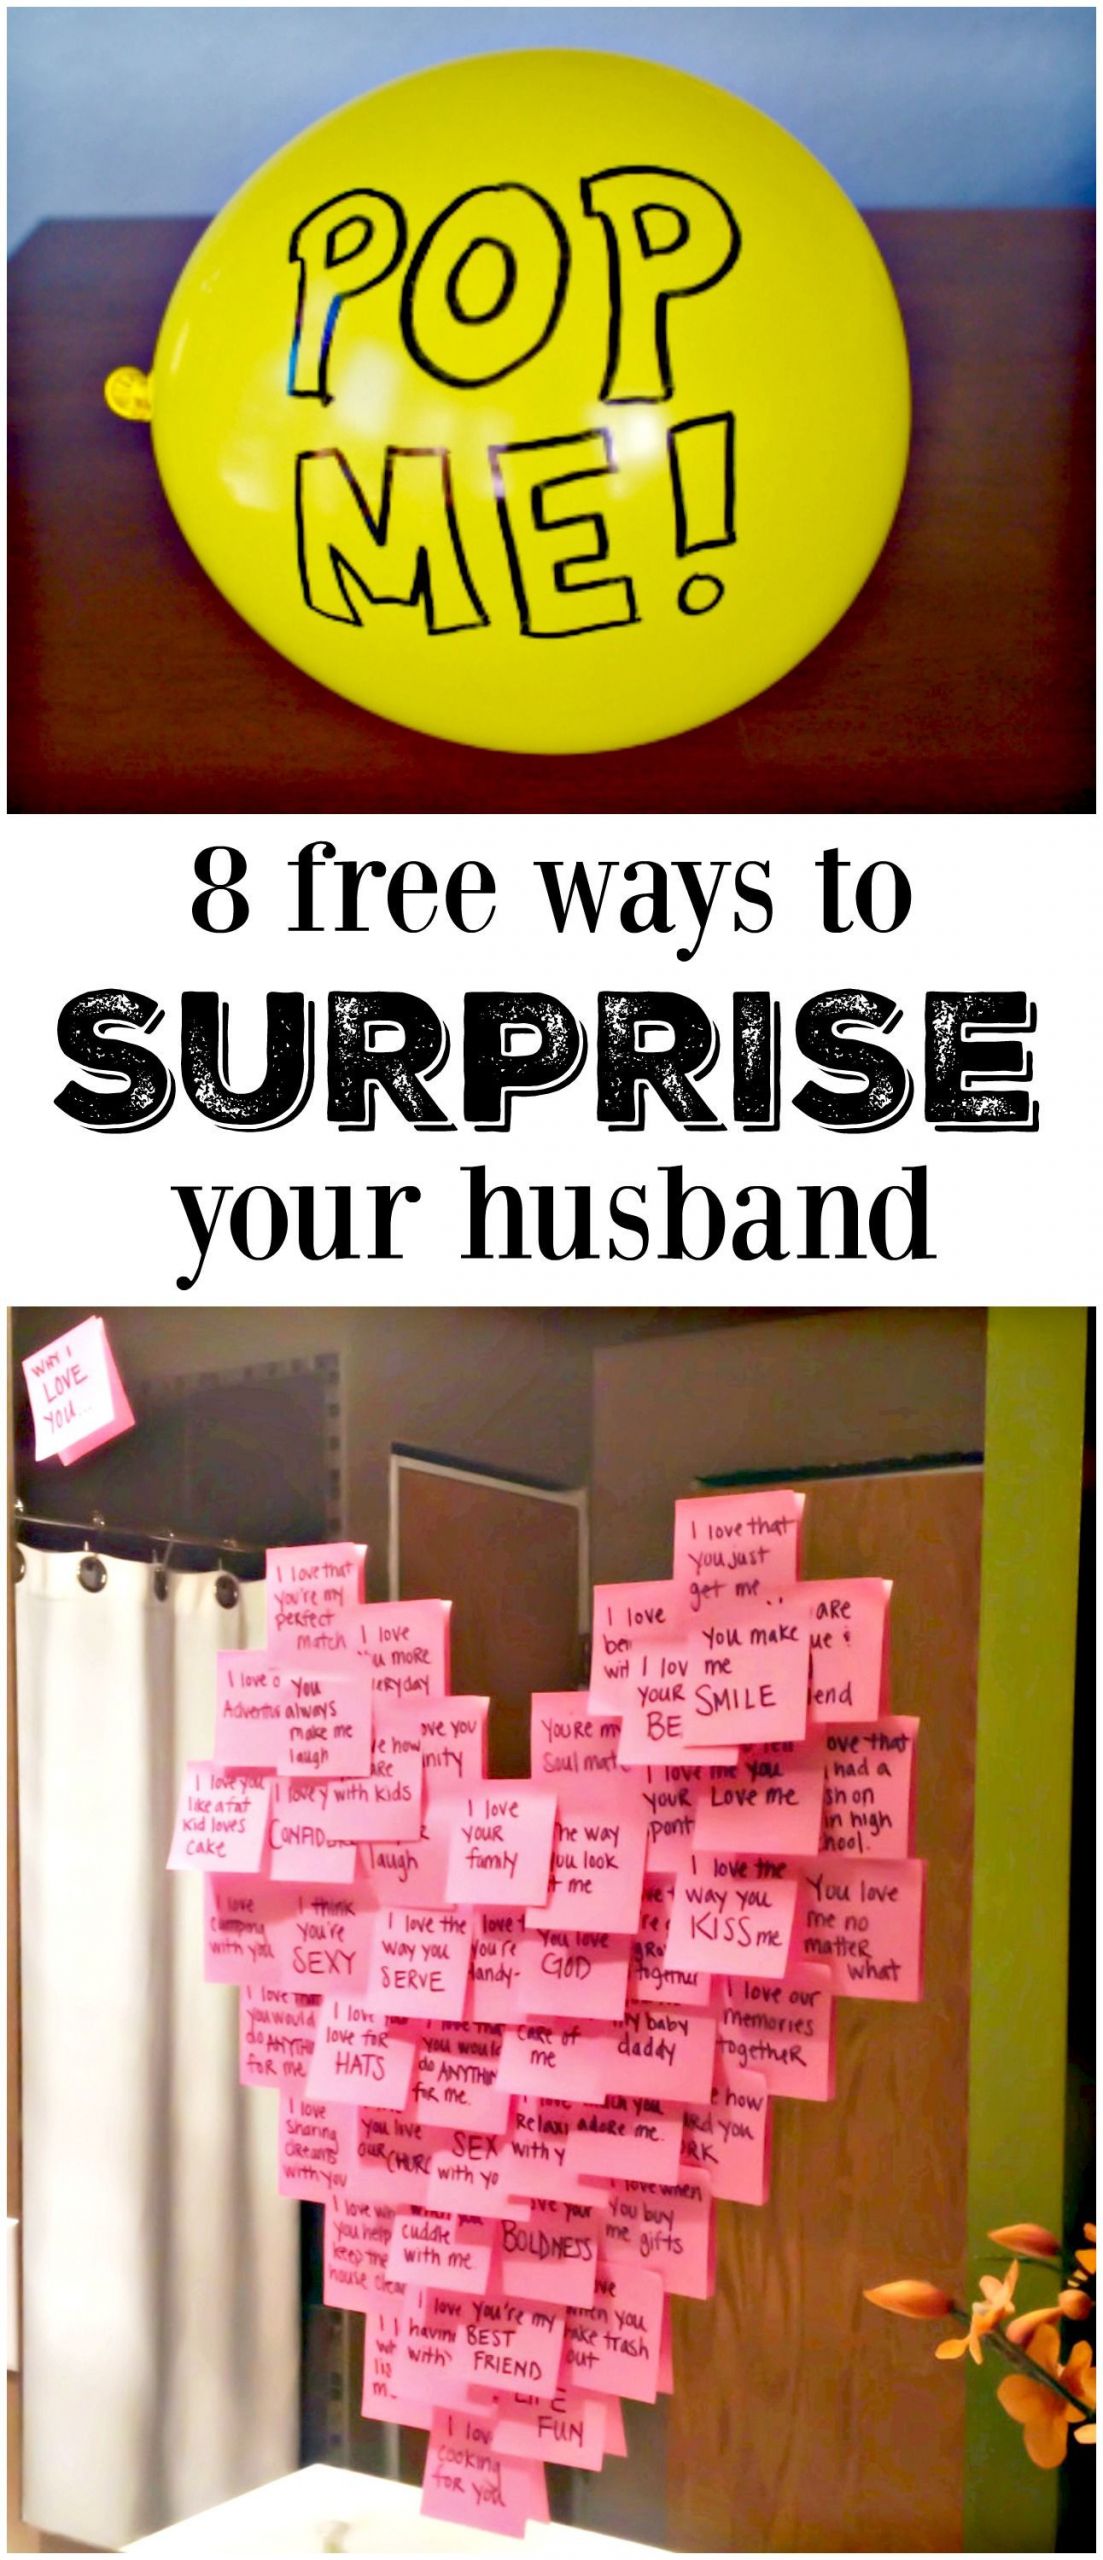 Romantic Birthday Gifts For Husband
 8 Meaningful Ways to Make His Day